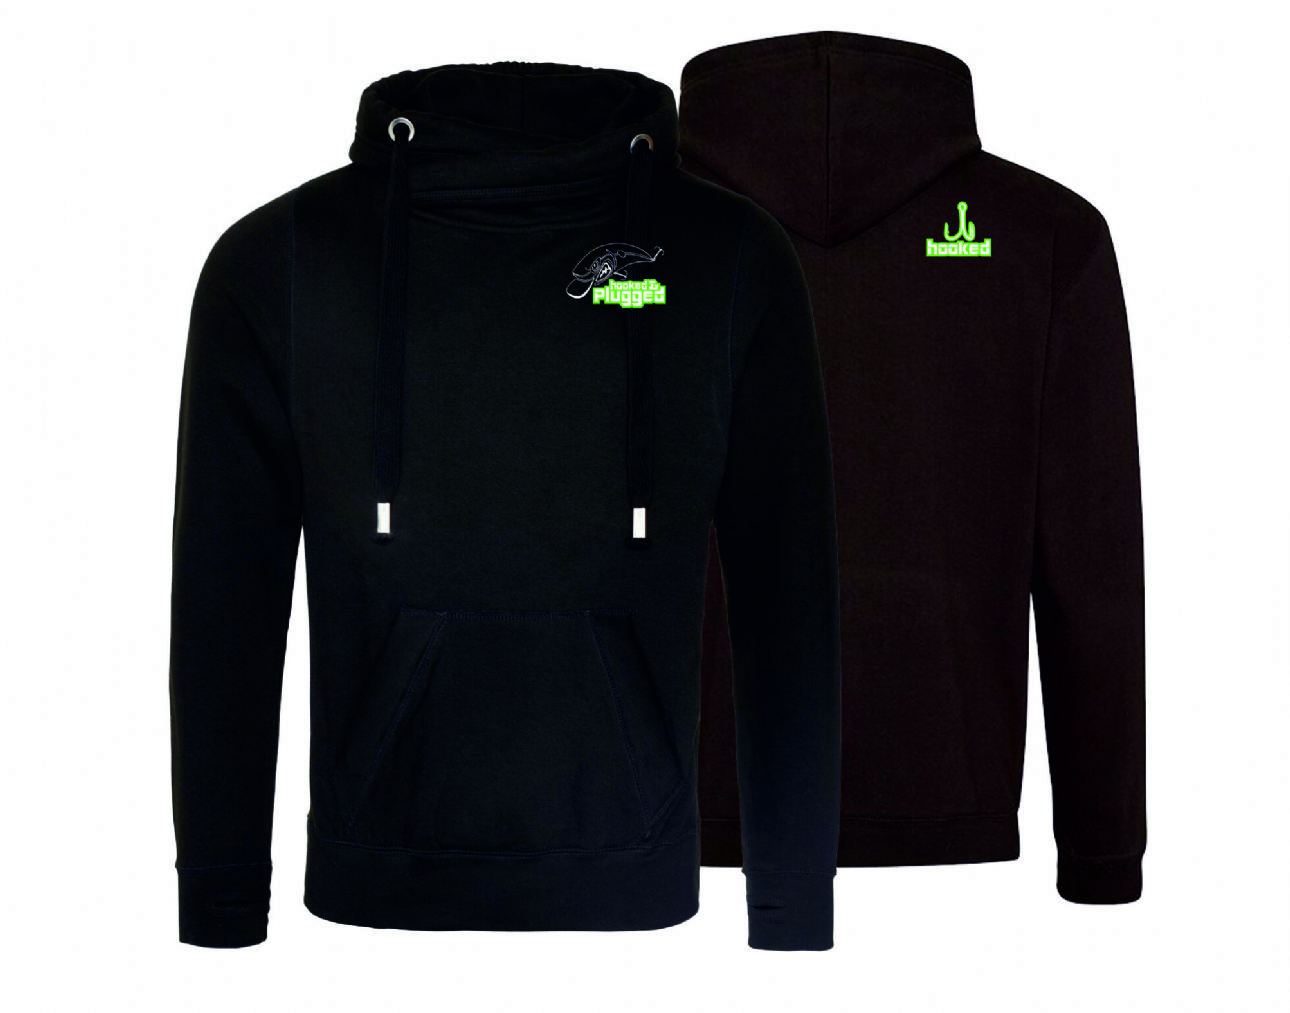 Hooked & Plugged X Neck Hoodies